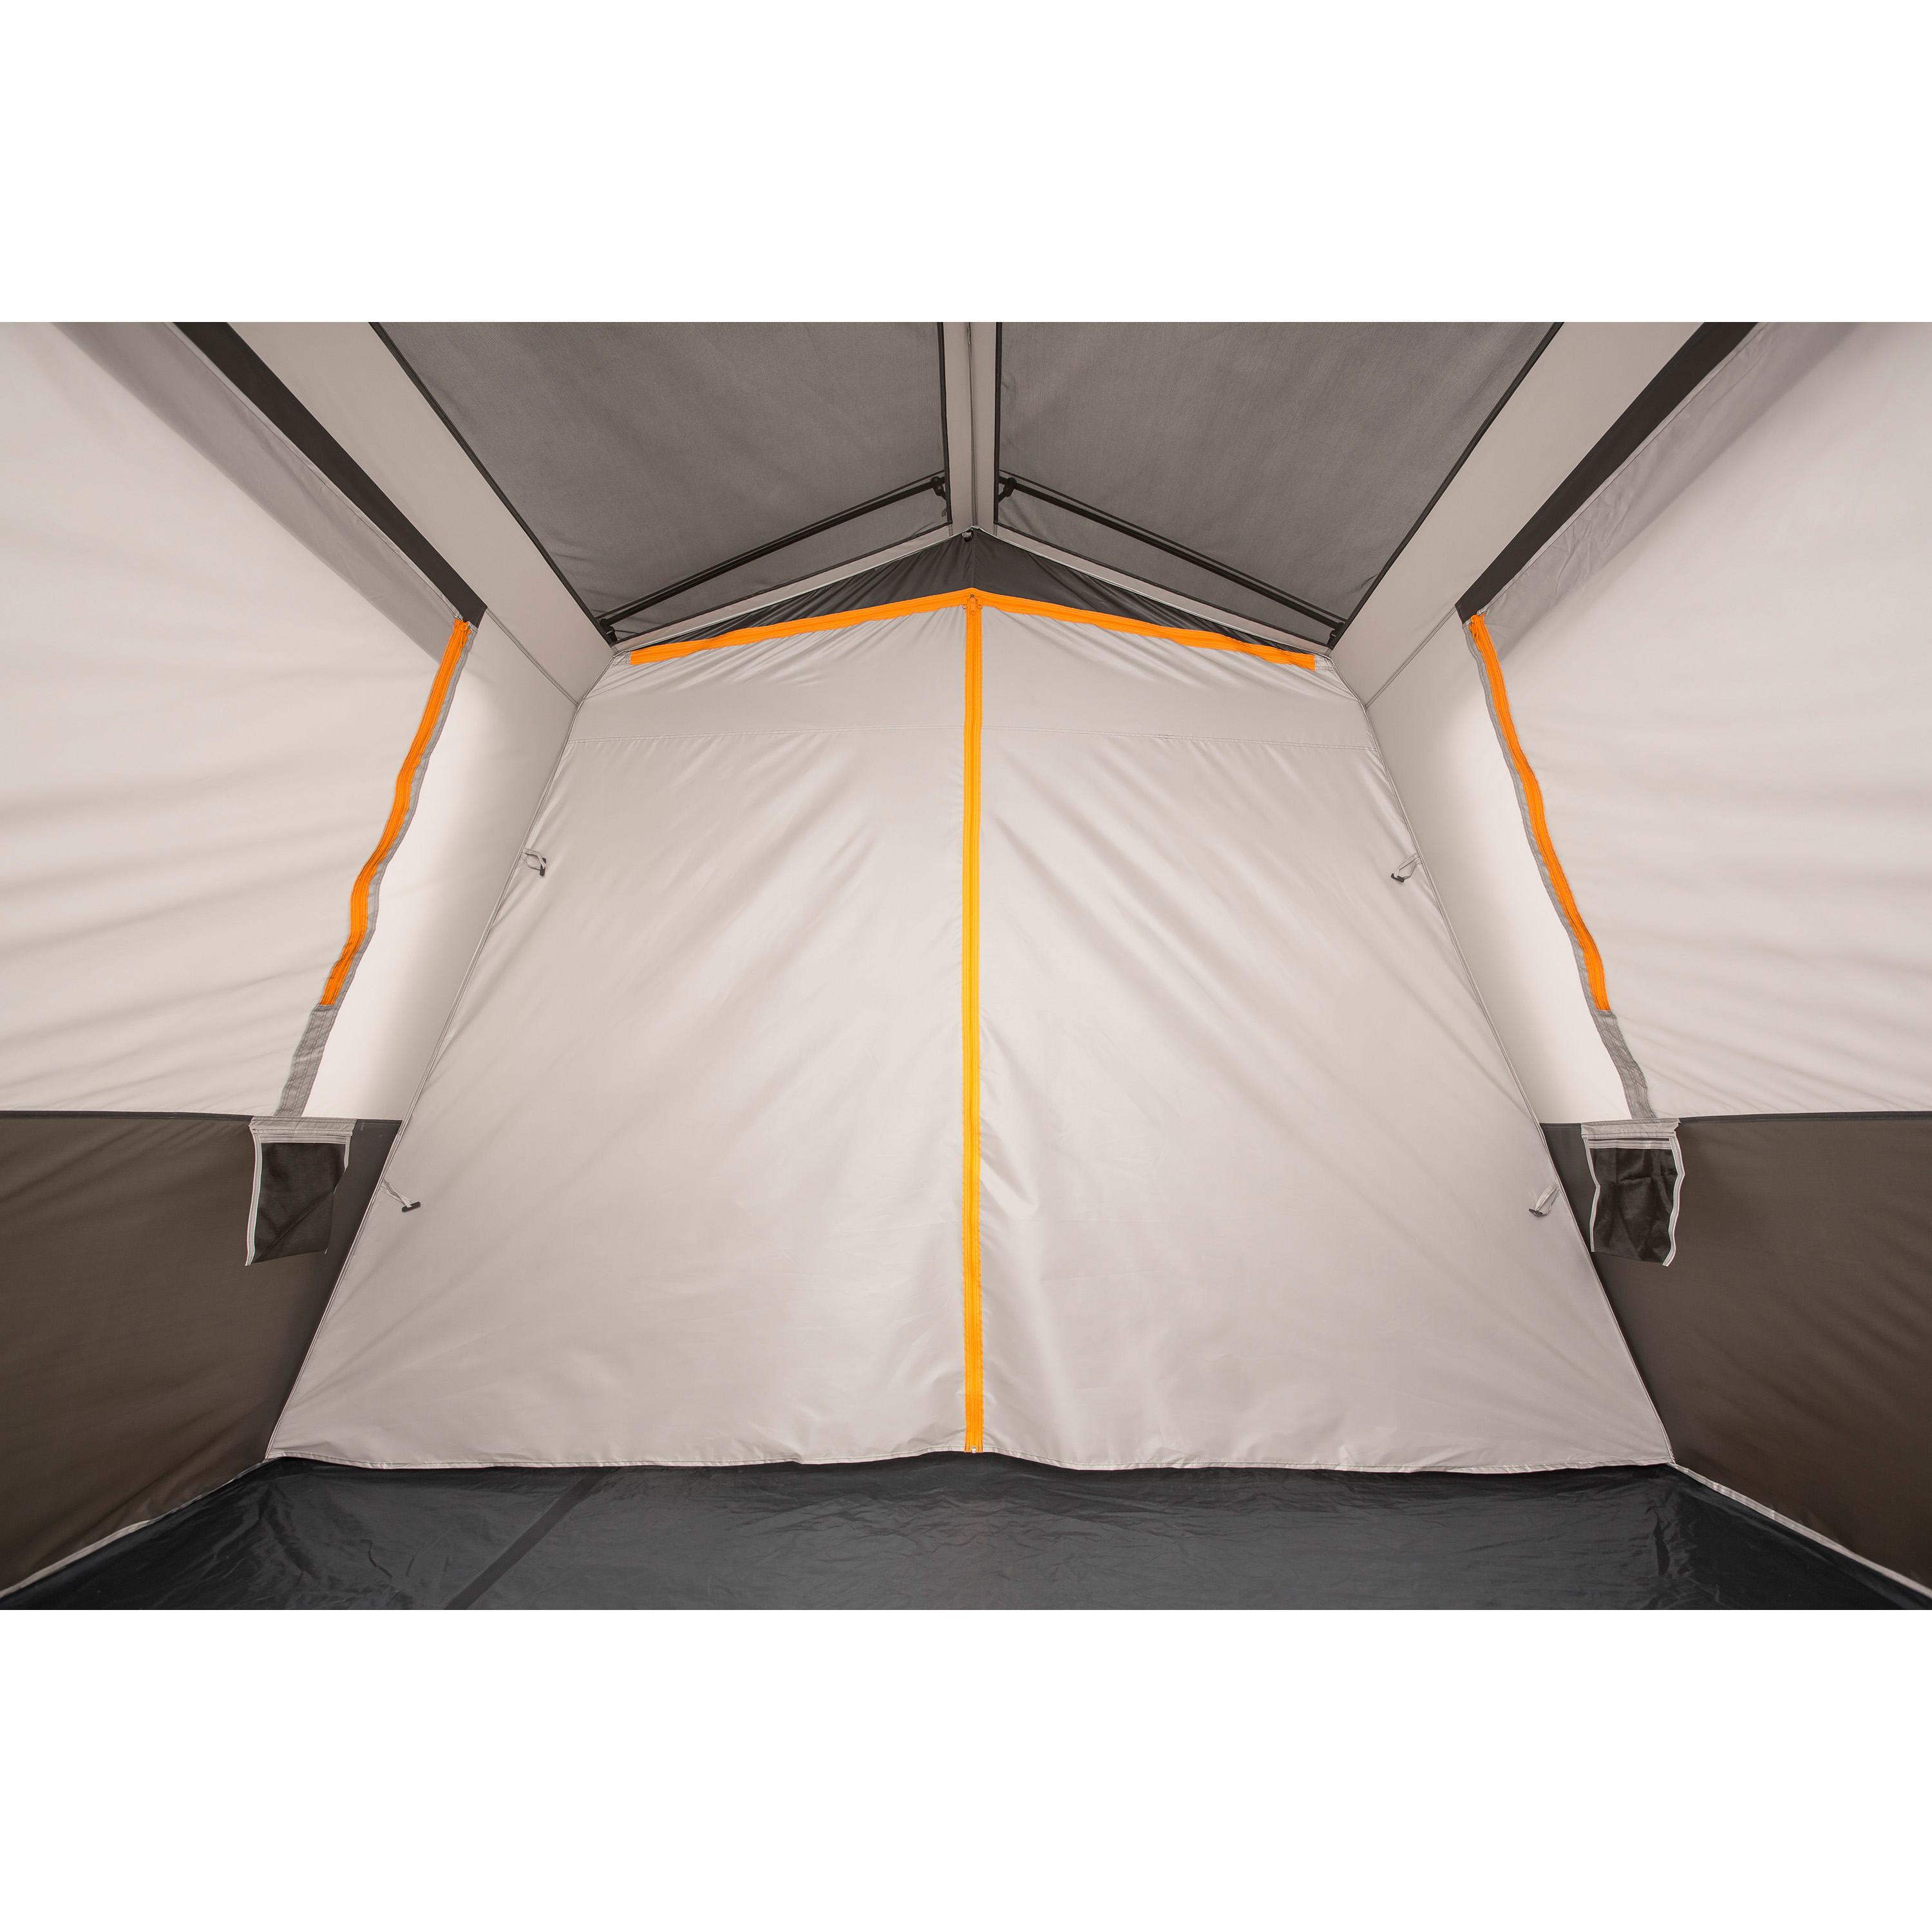 Bushnell Shield Series 9 Person Instant Cabin Tent - image 5 of 9